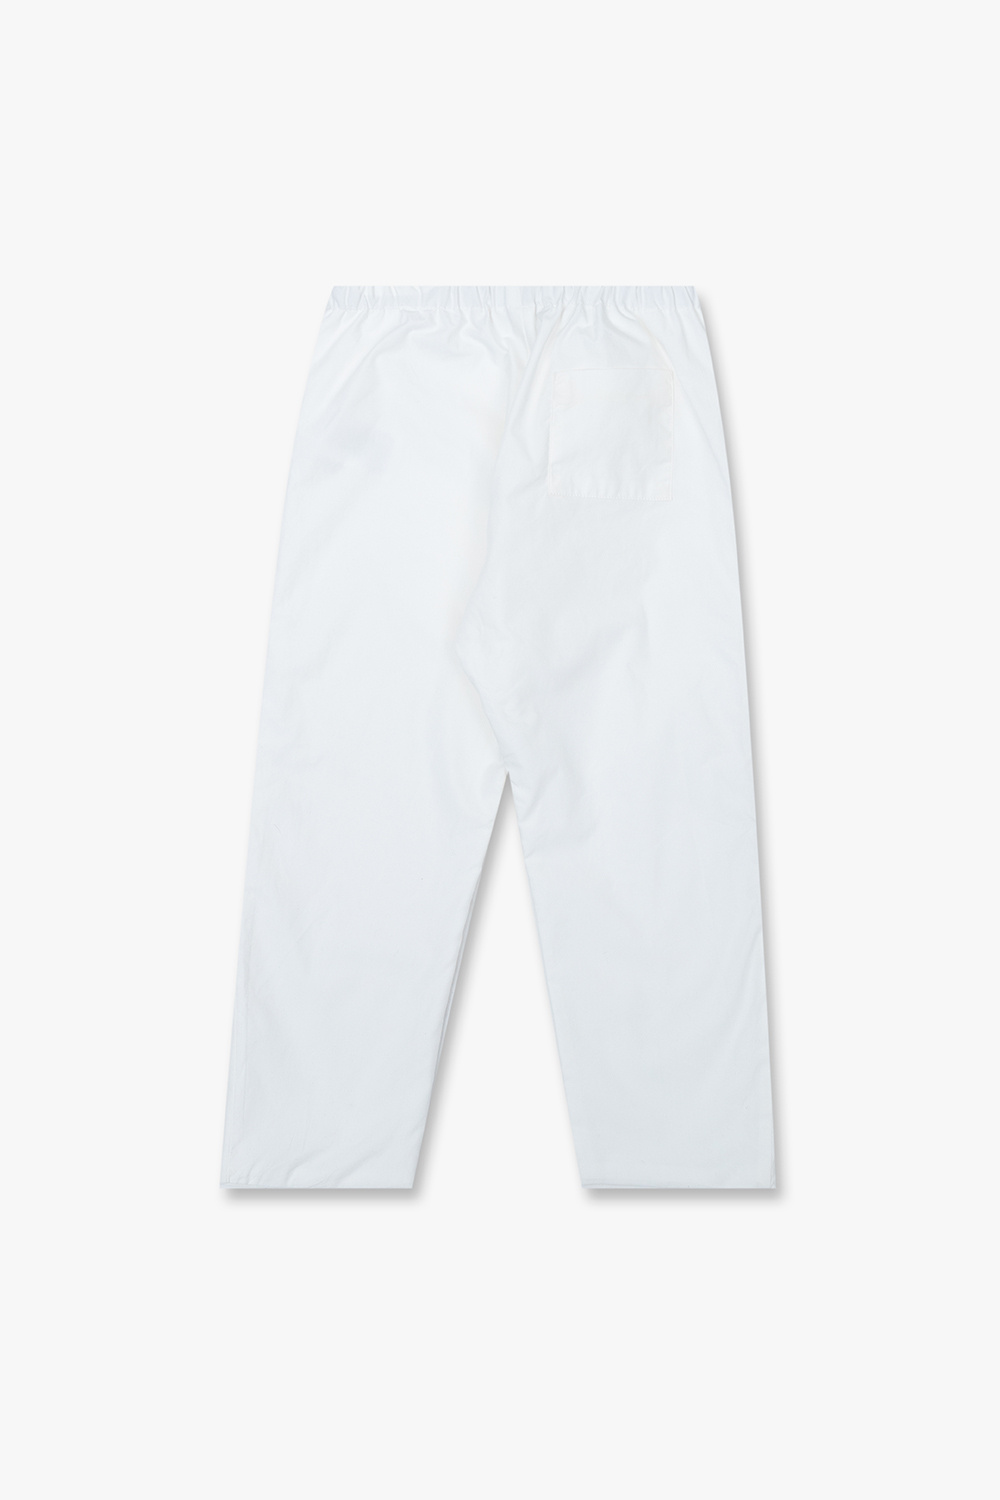 Bonpoint  features trousers with logo